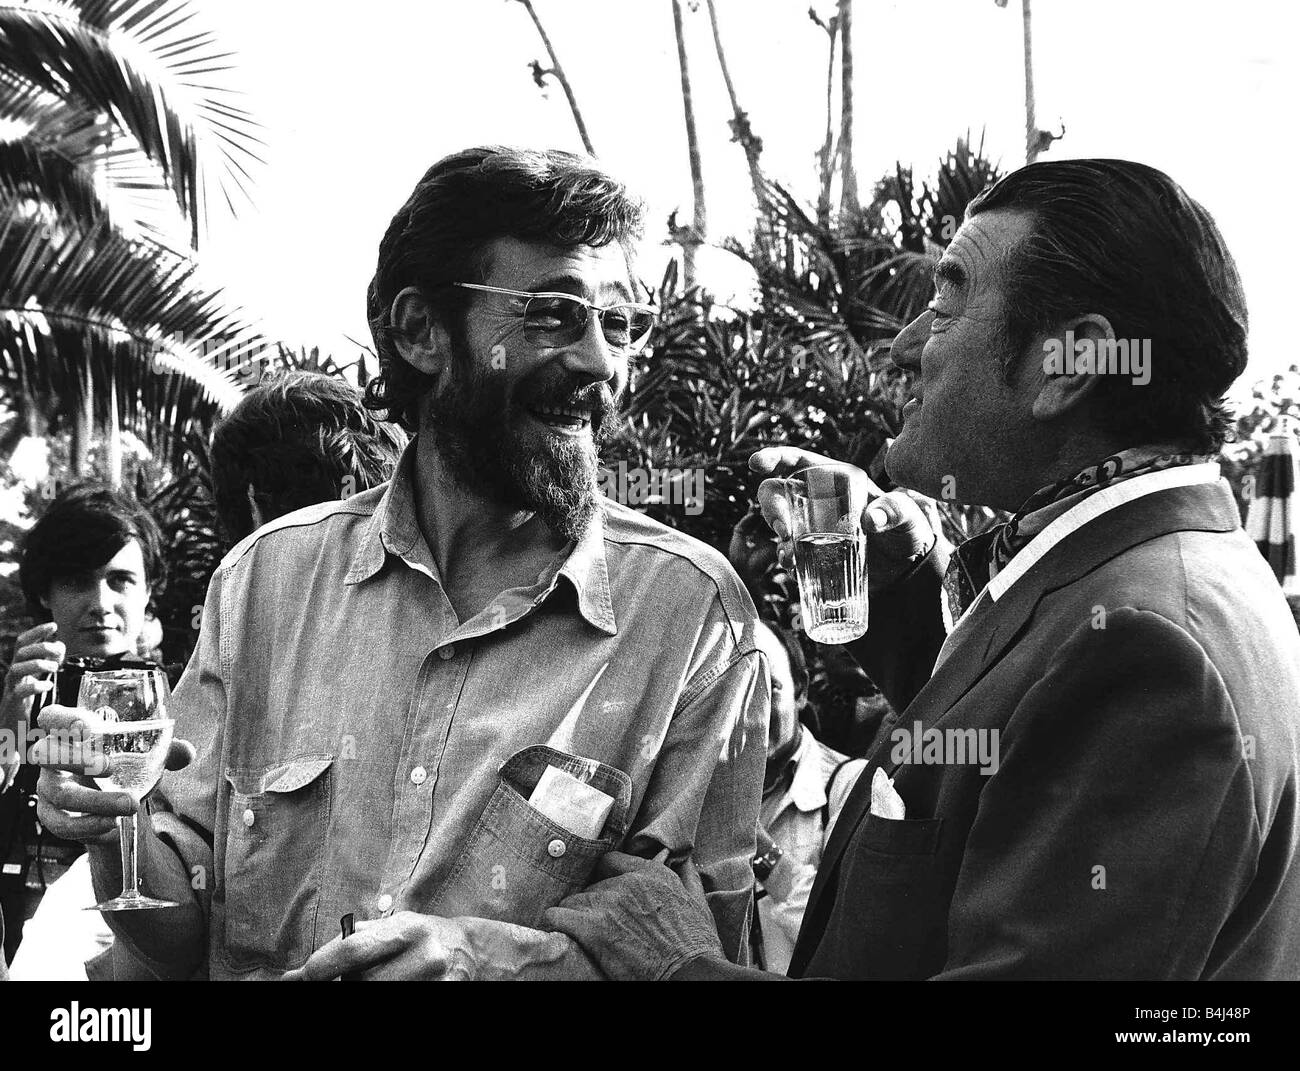 Peter O Toole Actor With Fellow Actor Jack Hawkins At The Cannes Film Festival In France May 1972 Dbase MSI Stock Photo